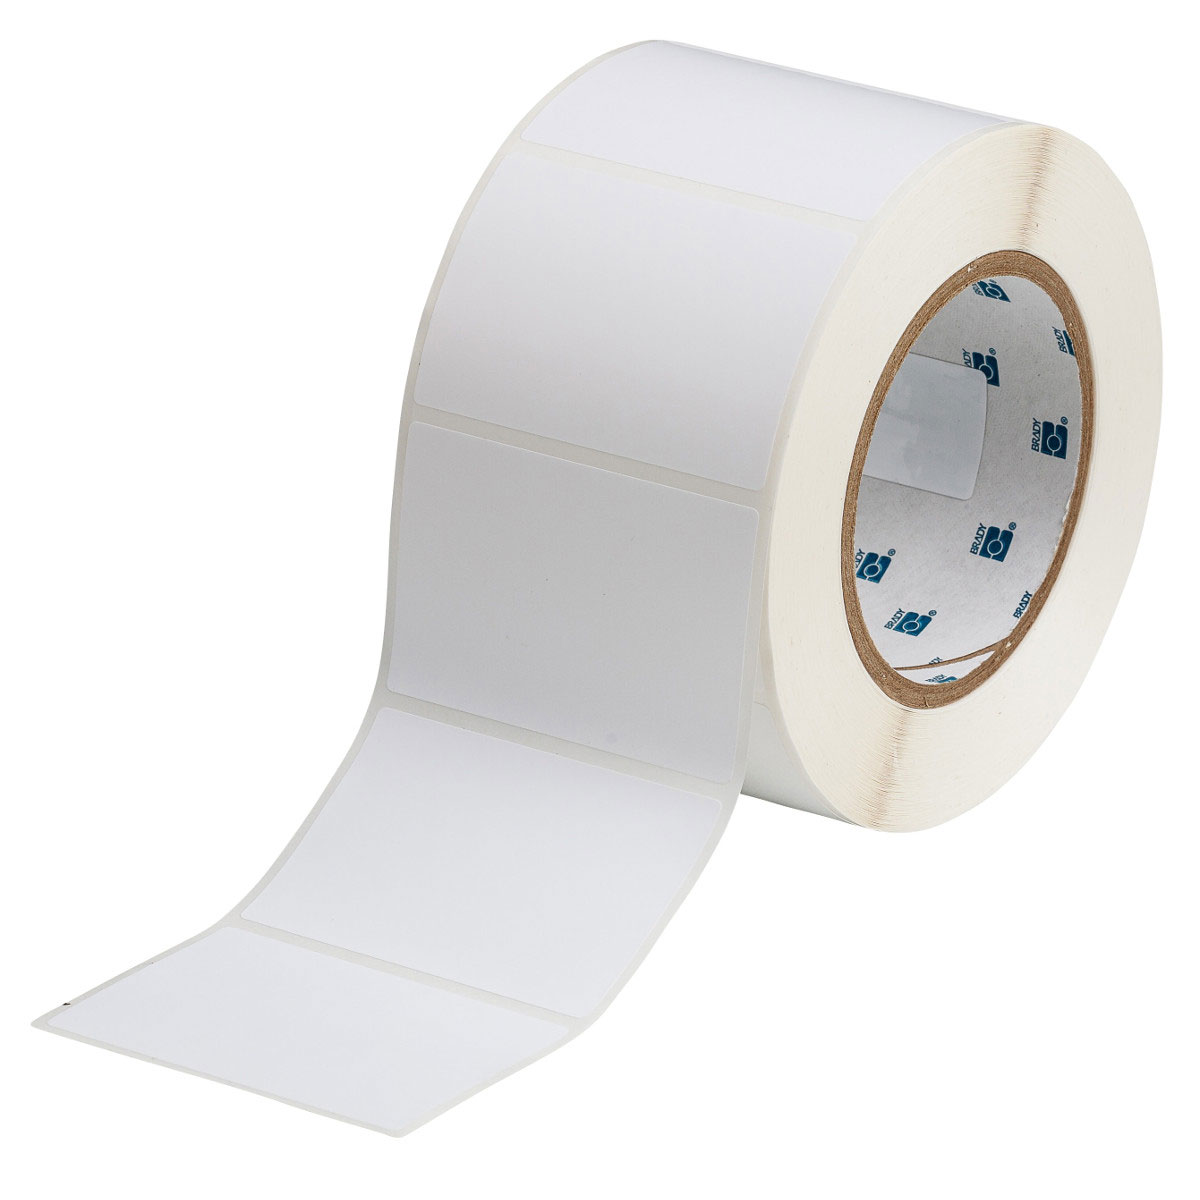 B-461 Self-Laminating Polyester 3000 per Roll Matte Finish White/Translucent Thermal Transfer Printable Label Brady THT-153-461-3 2.625 Width x 0.6 Height